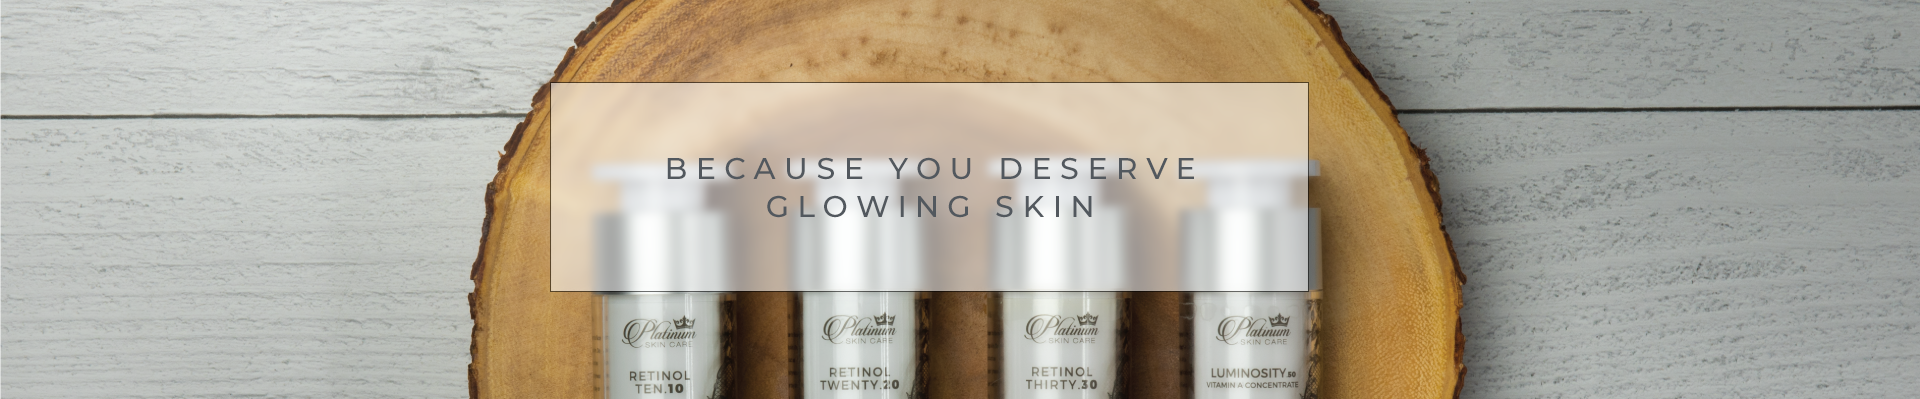 BECAUSE YOU DESERVE GLOWING SKIN